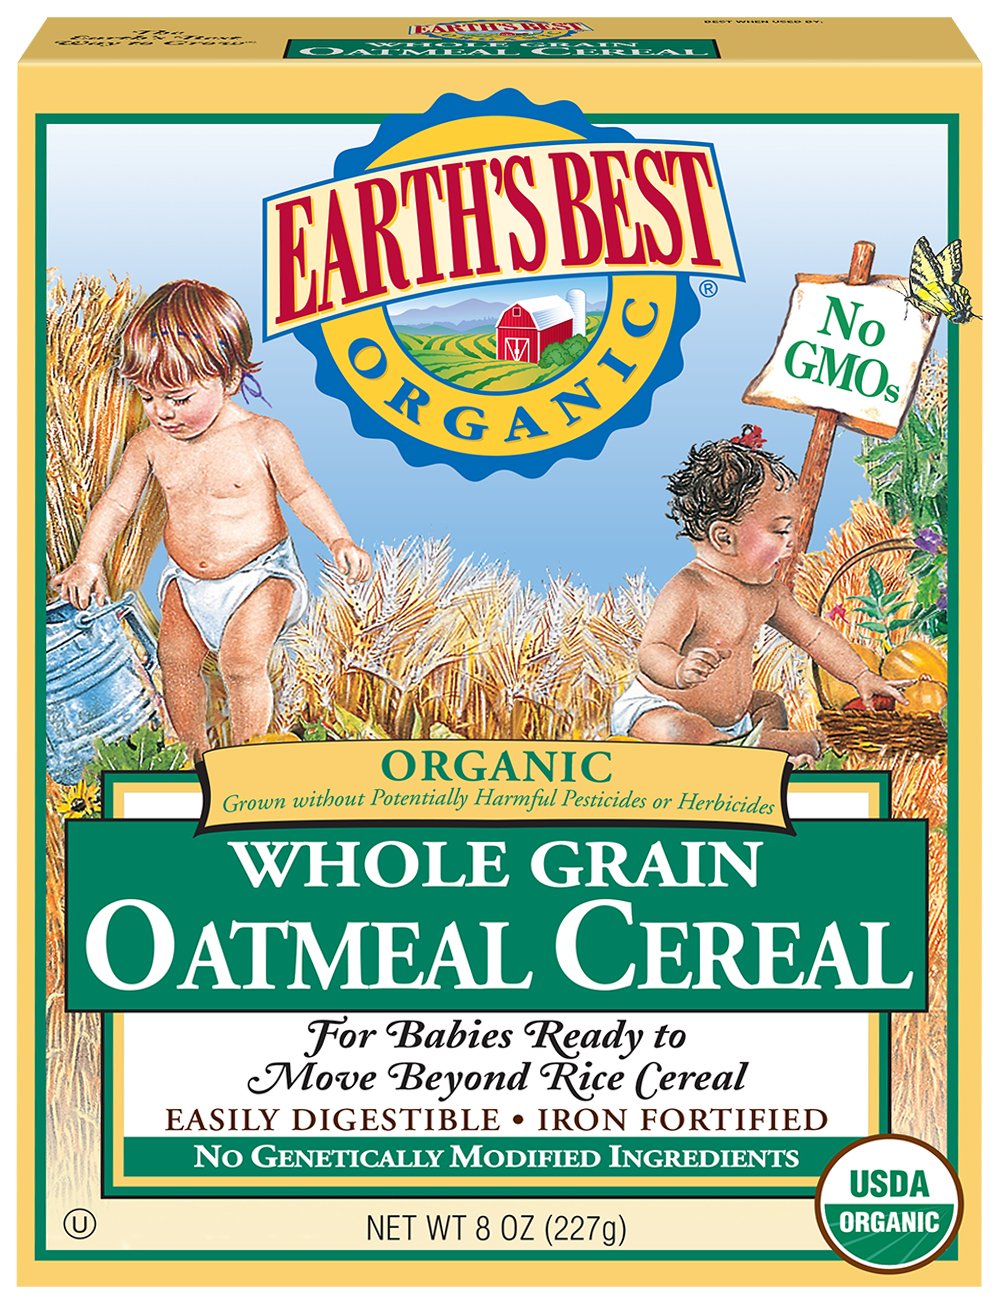 Earths Best Organic Whole Grain Infant Cereal